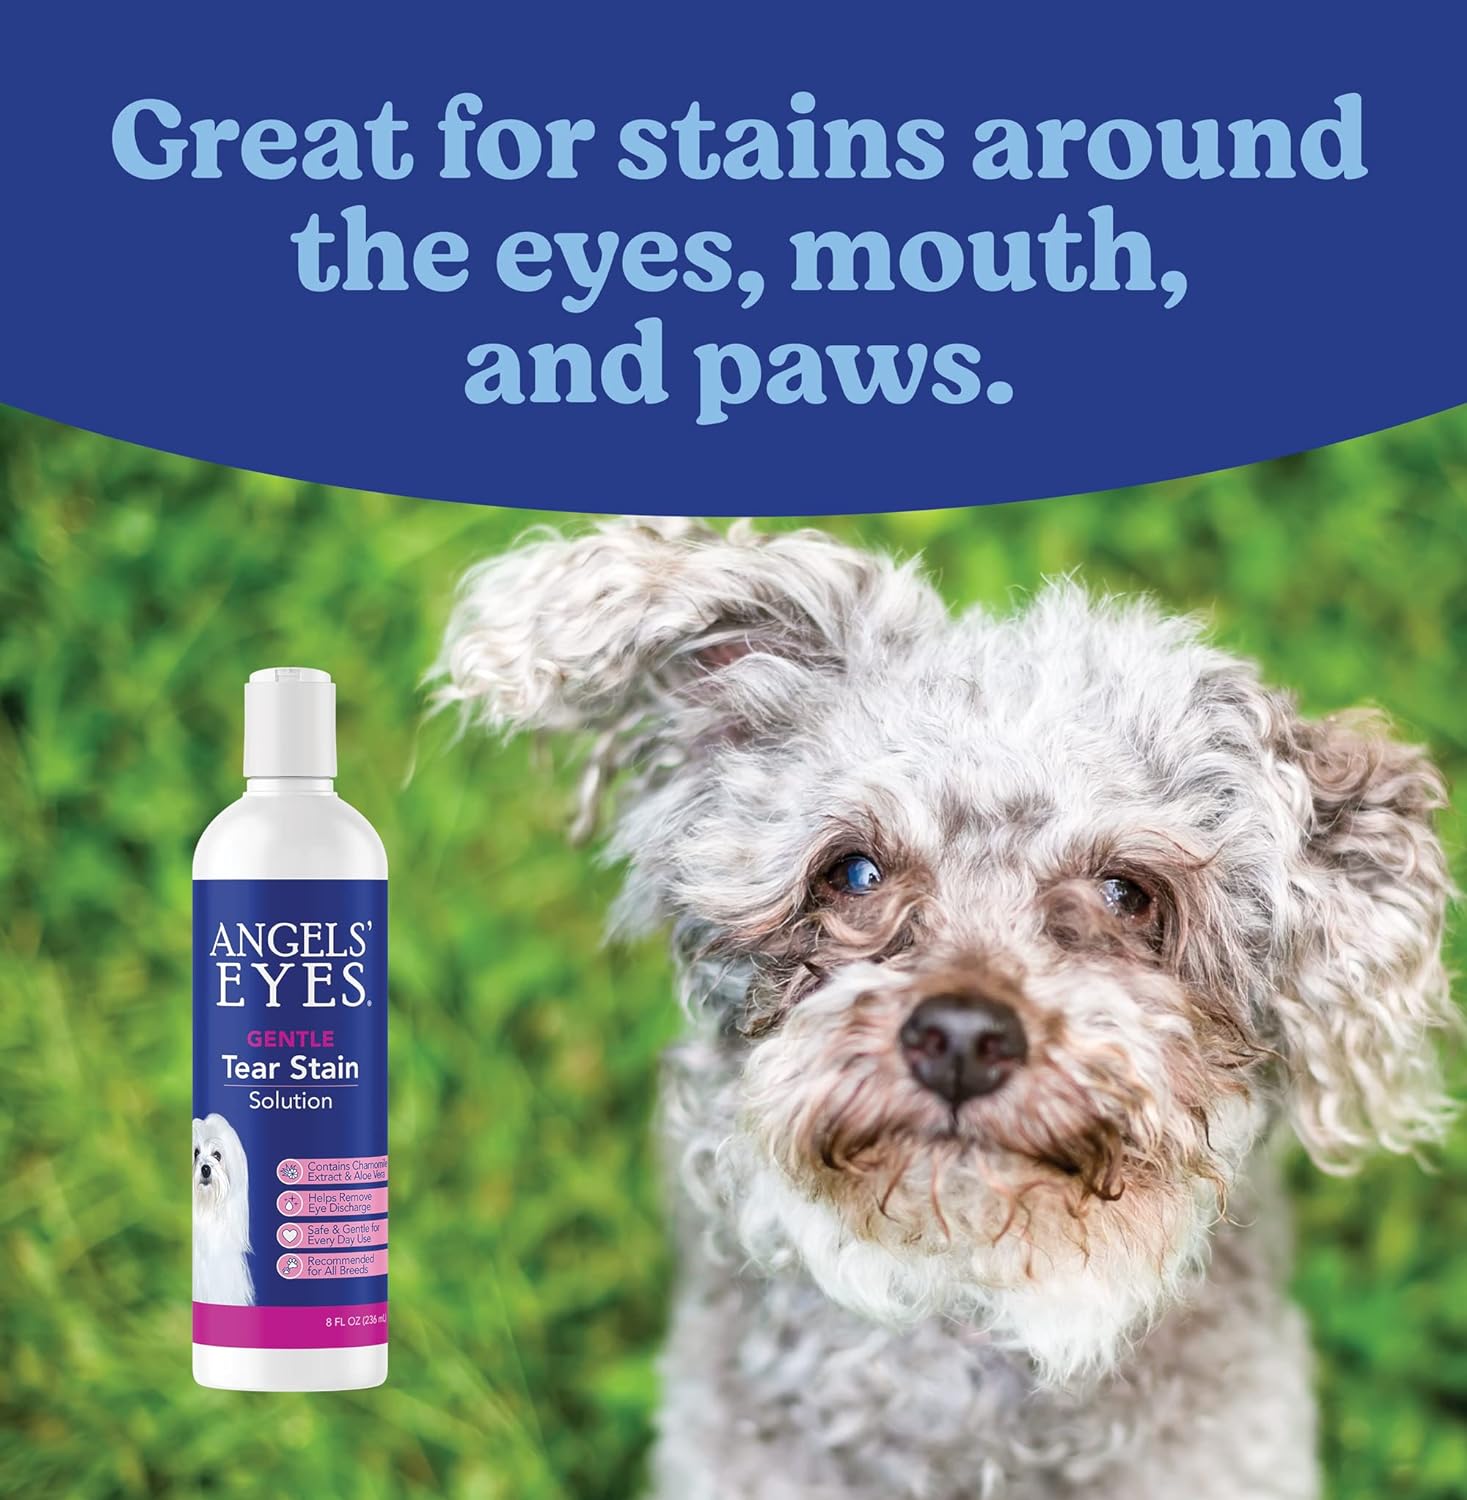 ANGELS' EYES Gentle Tear Stain Solution for Dogs and Cats | 8 oz Solution for Eye Area and Face | Remove Discharge, Dirt, Tear Stains, and Mucus : Pet Supplies